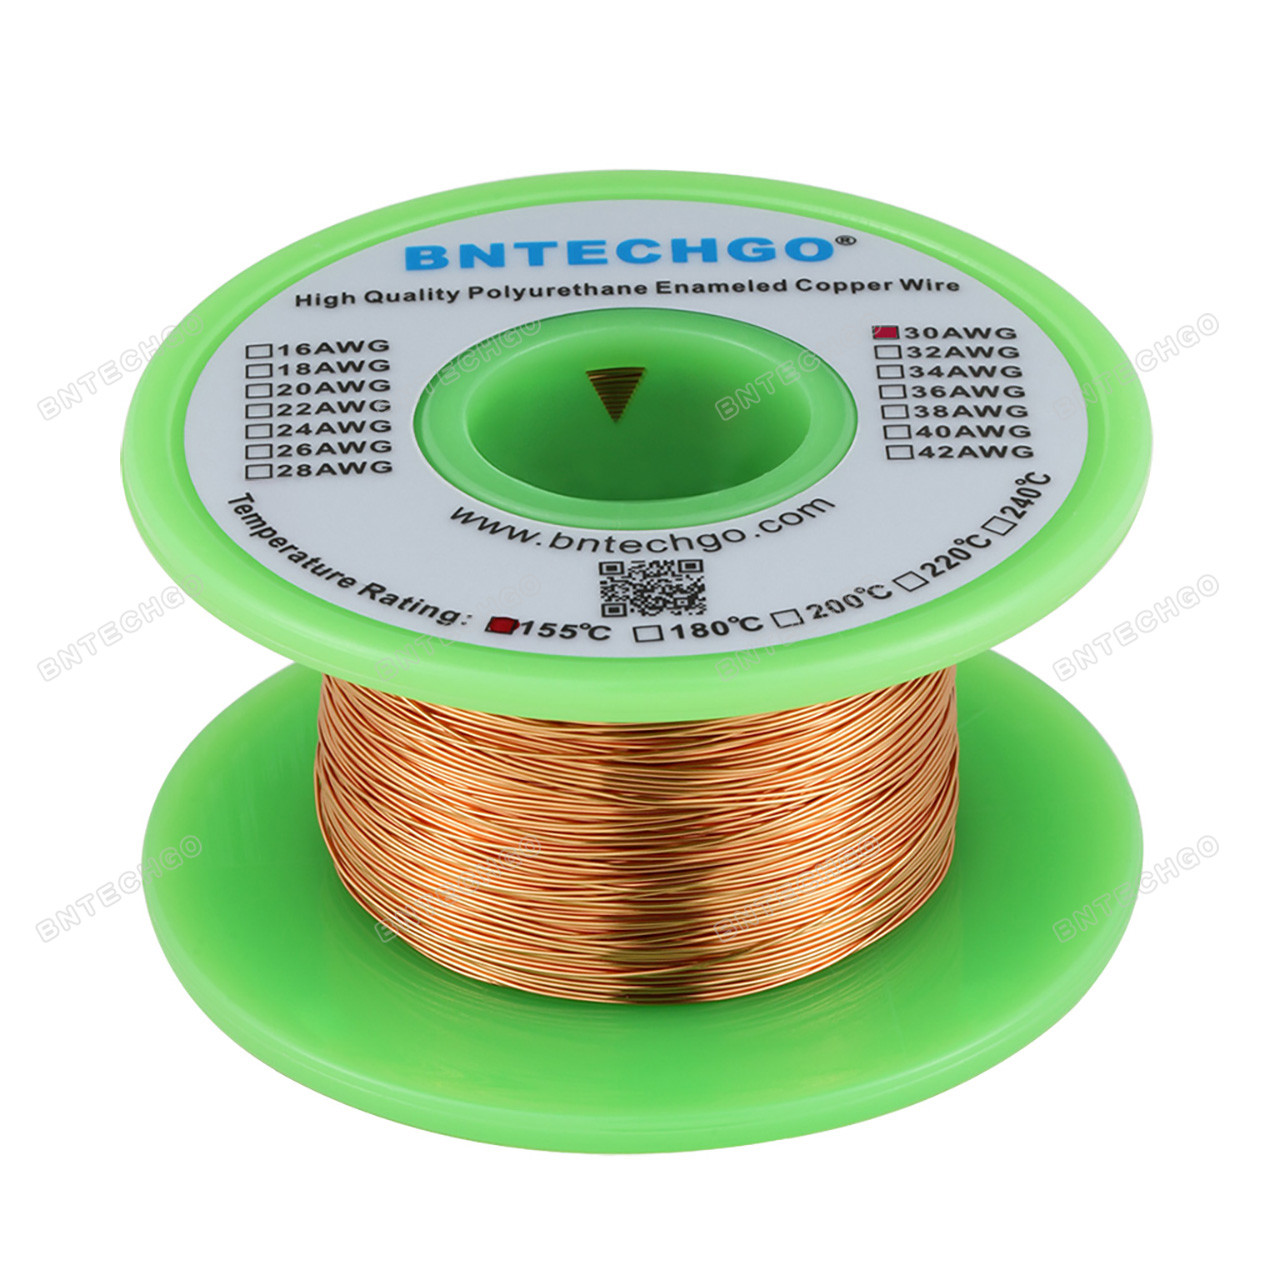 1000 grams COPPER round ENAMELED Electric wire 26 GAUGE wrap cord